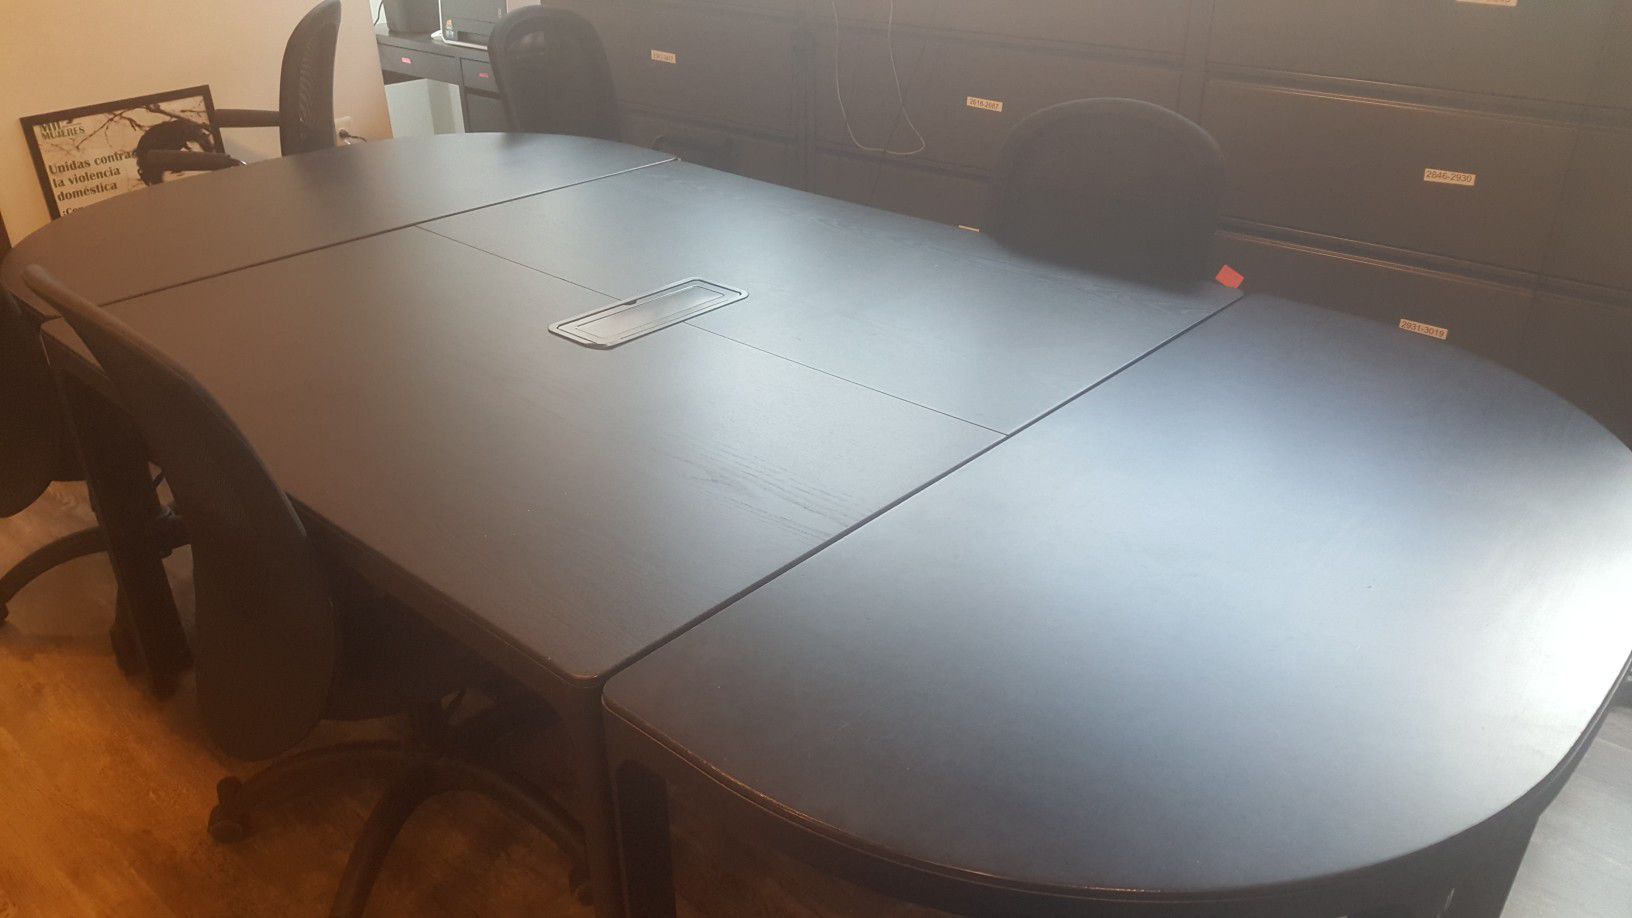 Conference Table and Chairs